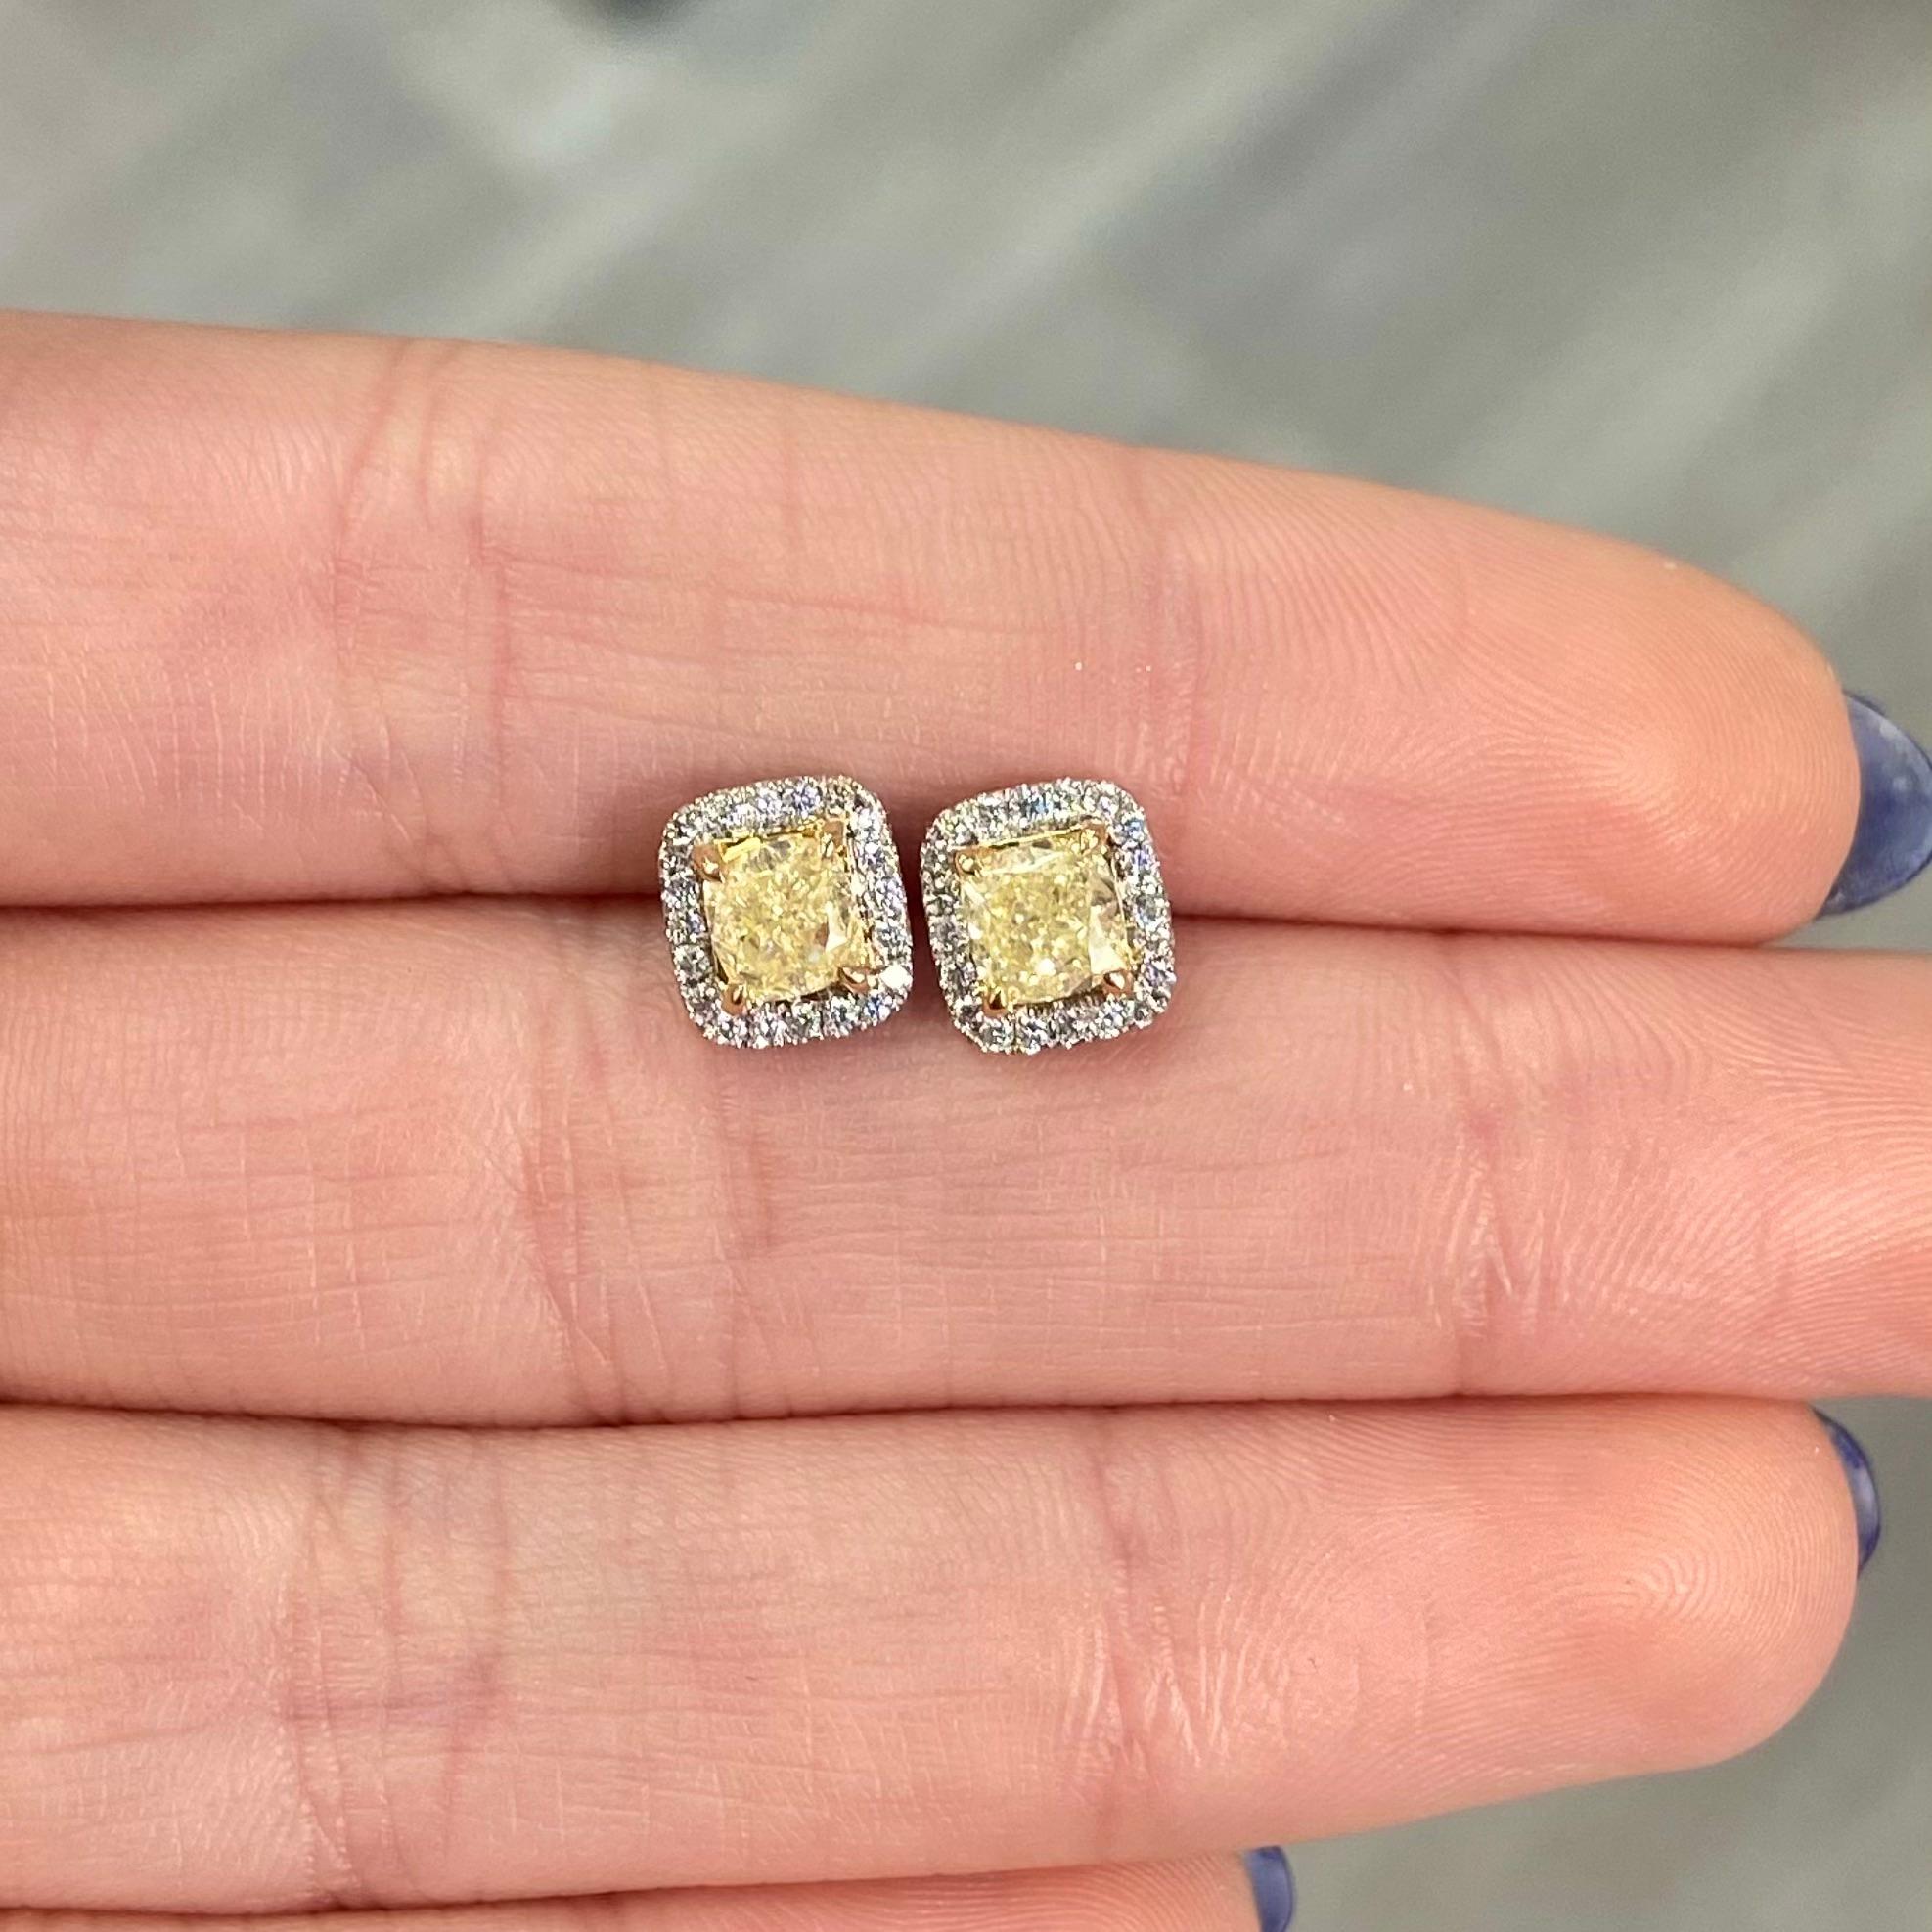 All natural diamonds
Fancy Light Yellow 
Set in 18kt White Gold with a Yellow Gold Basket
Push-backs
Apprixamtely 0.21ct of white diamonds
VS Clarity
